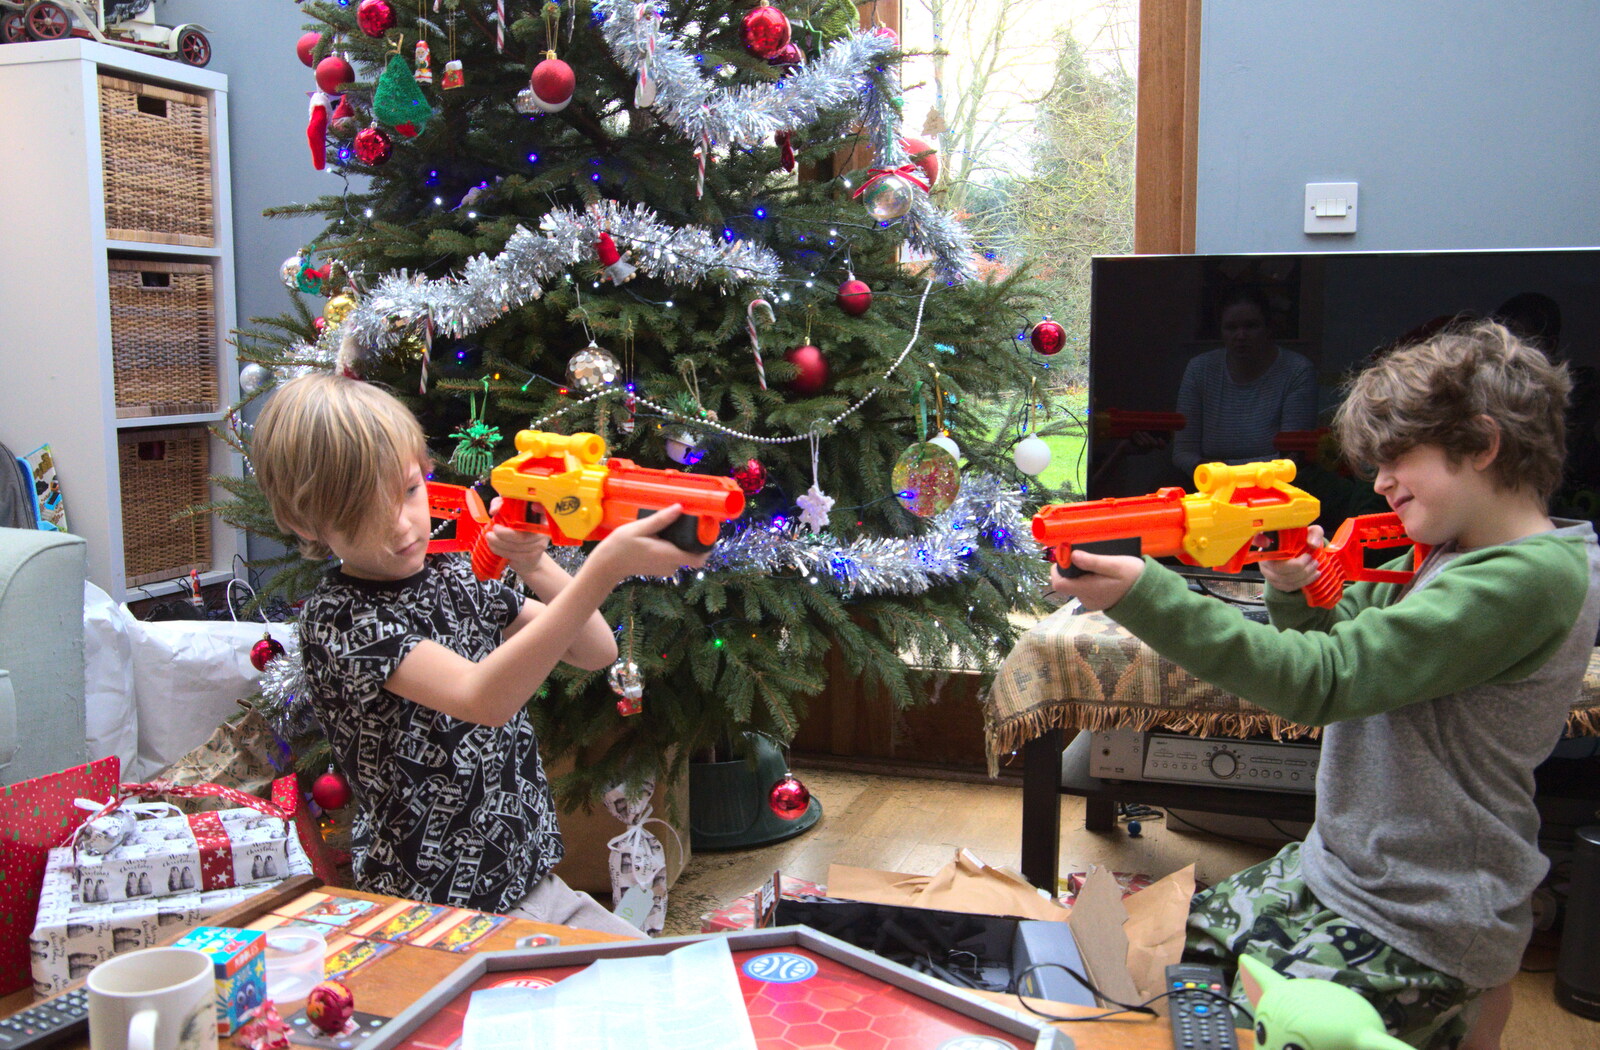 The boys have some new Nerf guns from Christmas Day, Brome, Suffolk - 25th December 2020